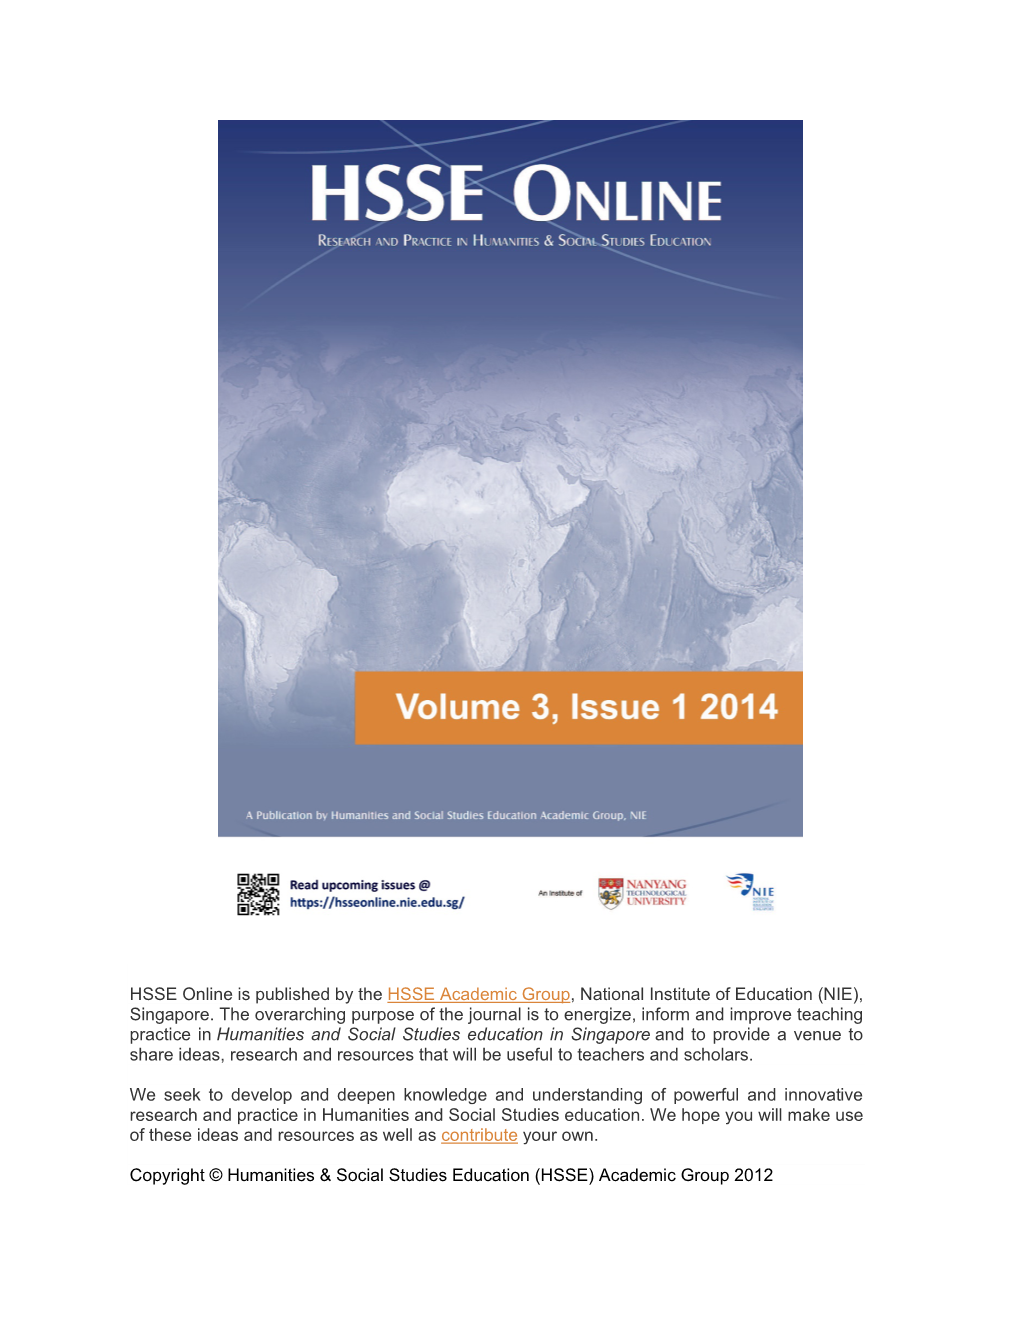 HSSE Online Is Published by the HSSE Academic Group, National Institute of Education (NIE), Singapore